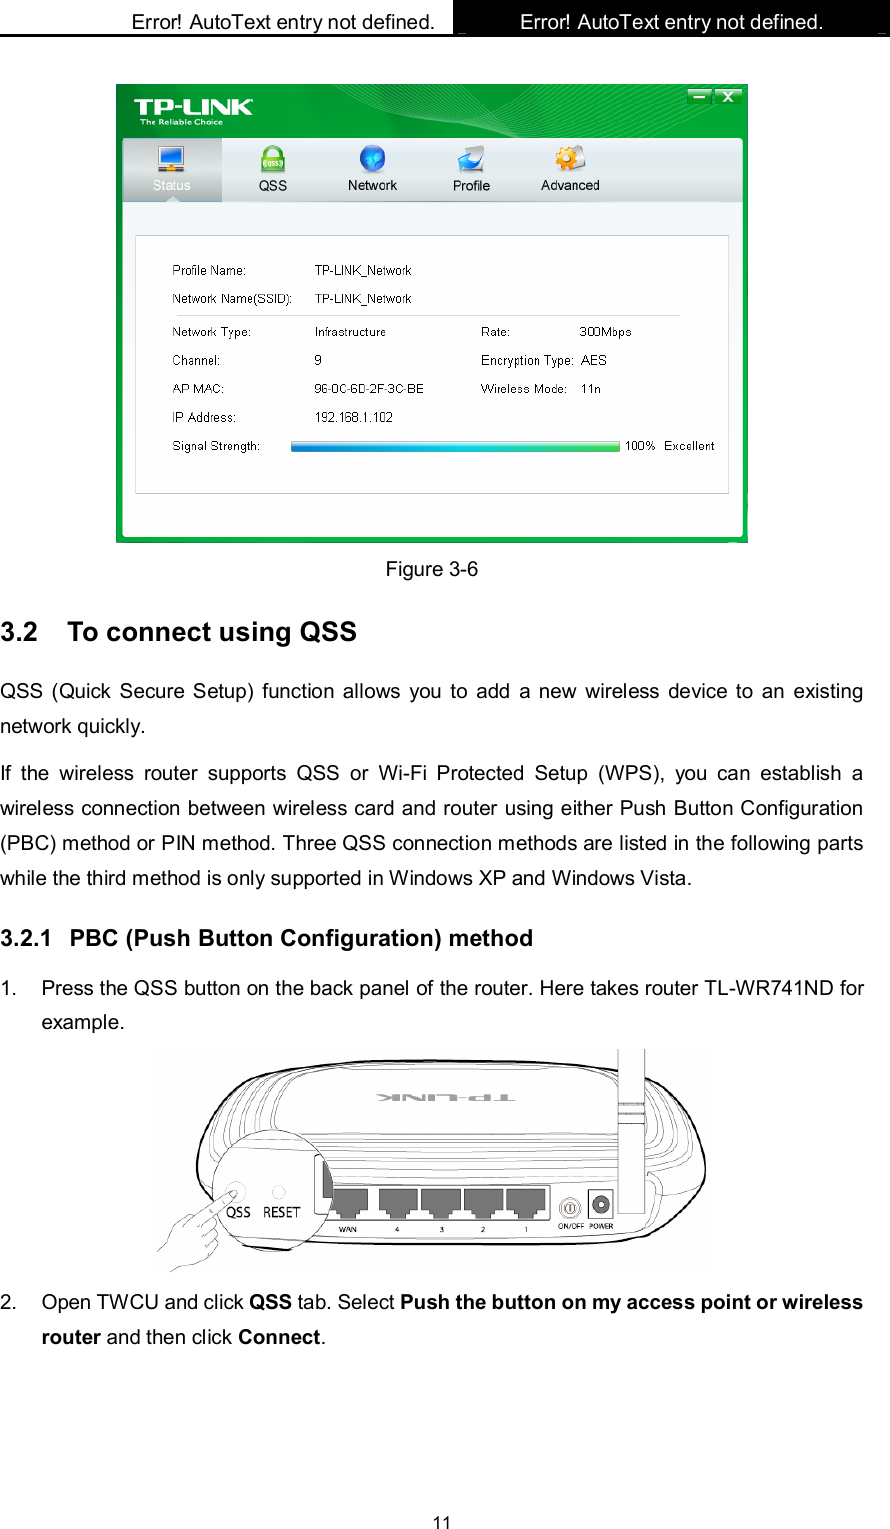    Error! AutoText entry not defined. Error! AutoText entry not defined.    11  Figure 3-6 3.2  To connect using QSS QSS (Quick Secure Setup) function allows  you  to  add  a new  wireless device to  an  existing network quickly. If  the  wireless  router  supports  QSS  or  Wi-Fi  Protected  Setup  (WPS),  you  can  establish  a wireless connection between wireless card and router using either Push Button Configuration (PBC) method or PIN method. Three QSS connection methods are listed in the following parts while the third method is only supported in Windows XP and Windows Vista.   3.2.1  PBC (Push Button Configuration) method 1.  Press the QSS button on the back panel of the router. Here takes router TL-WR741ND for example.    2.  Open TWCU and click QSS tab. Select Push the button on my access point or wireless router and then click Connect.   